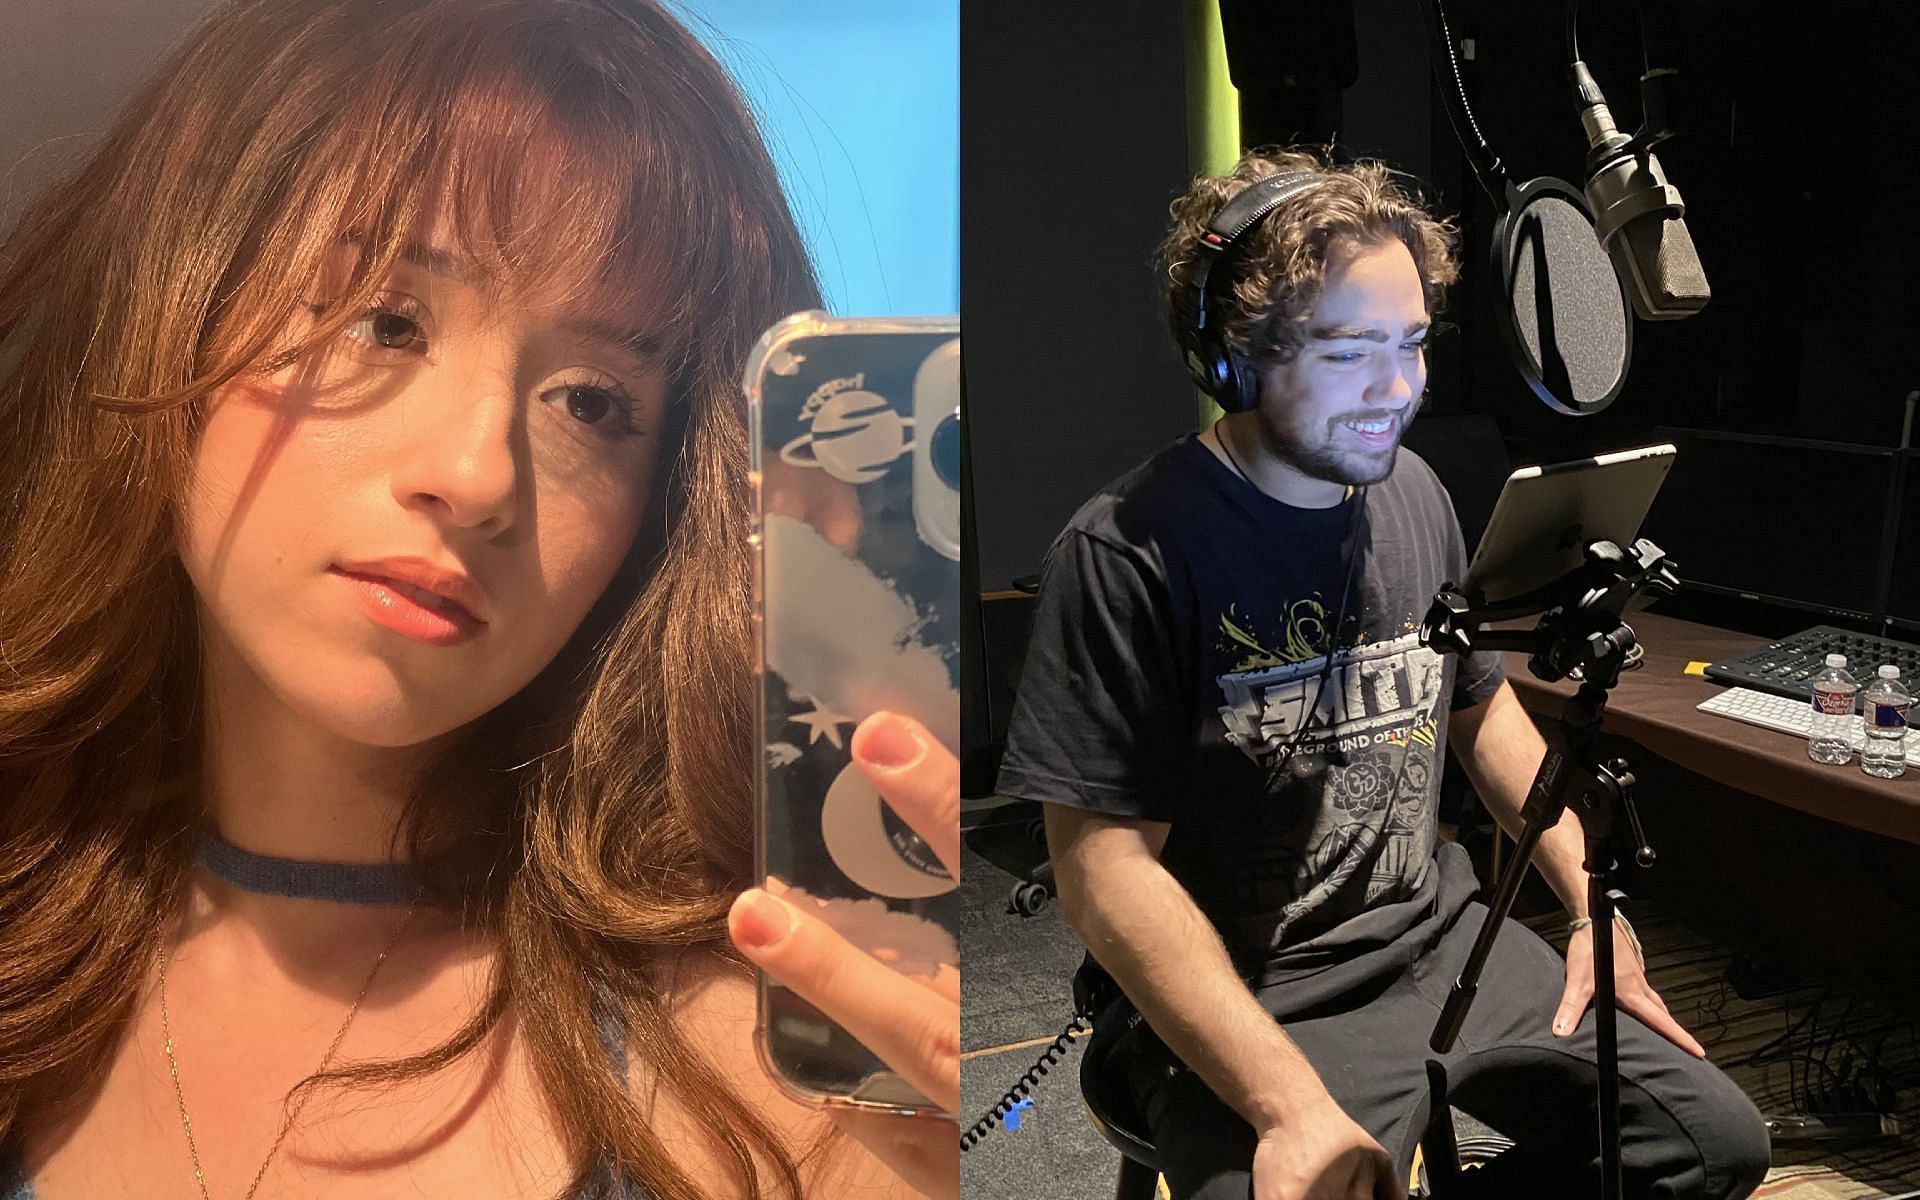 Pokimane and Mizkif team up, and call on Twitch to get slots and gambling banned from the platform (Images via Pokimane and Mizkif/Twitter)